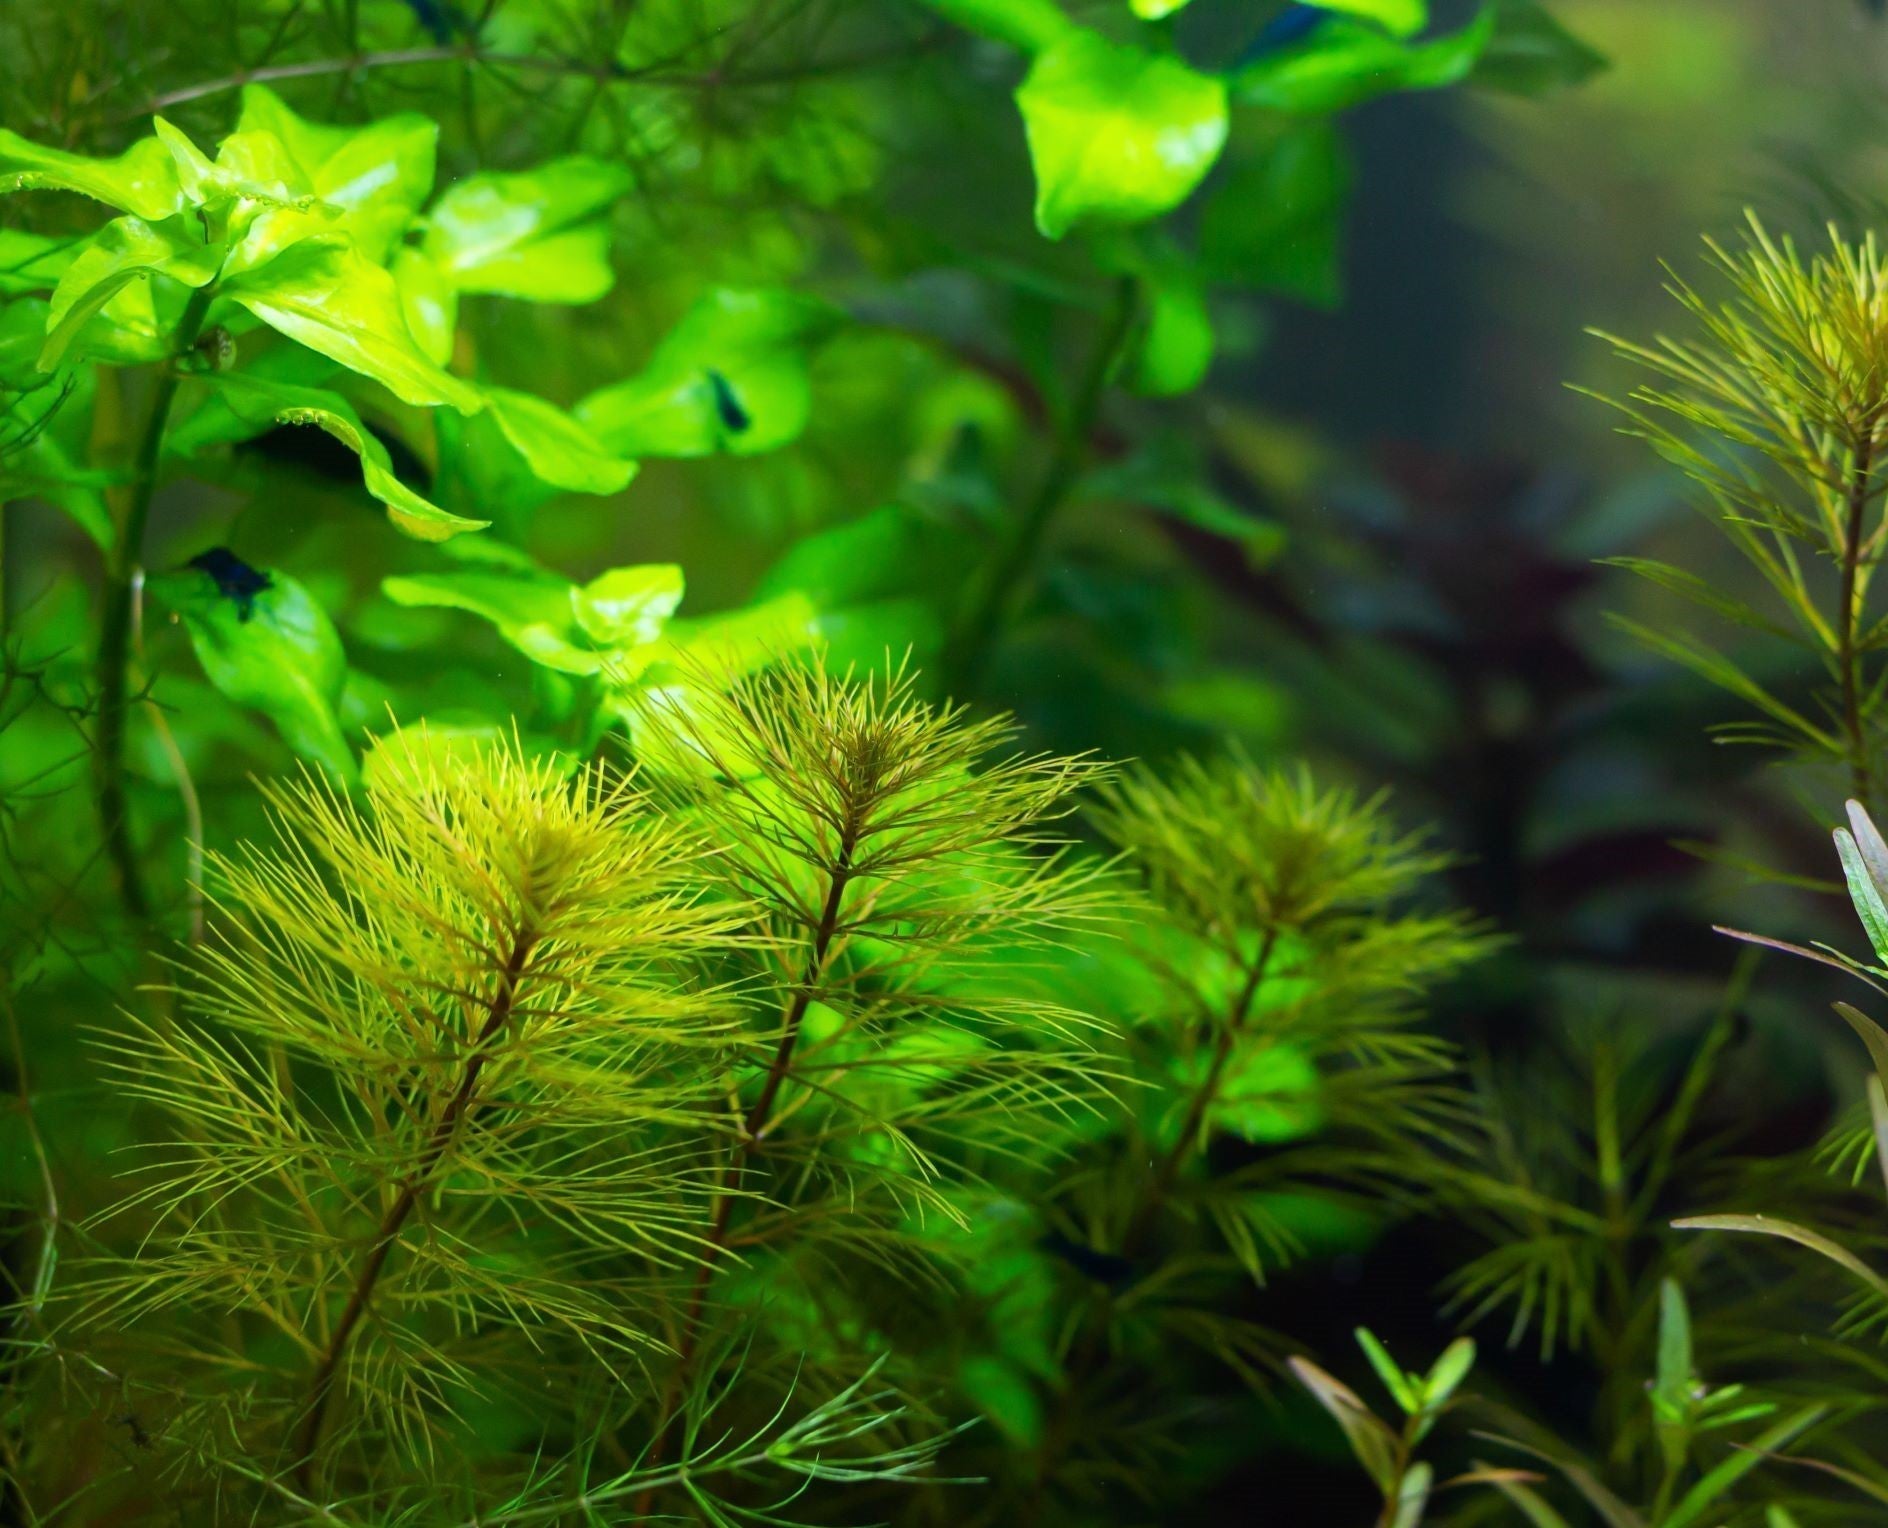 Plants in a planted tank